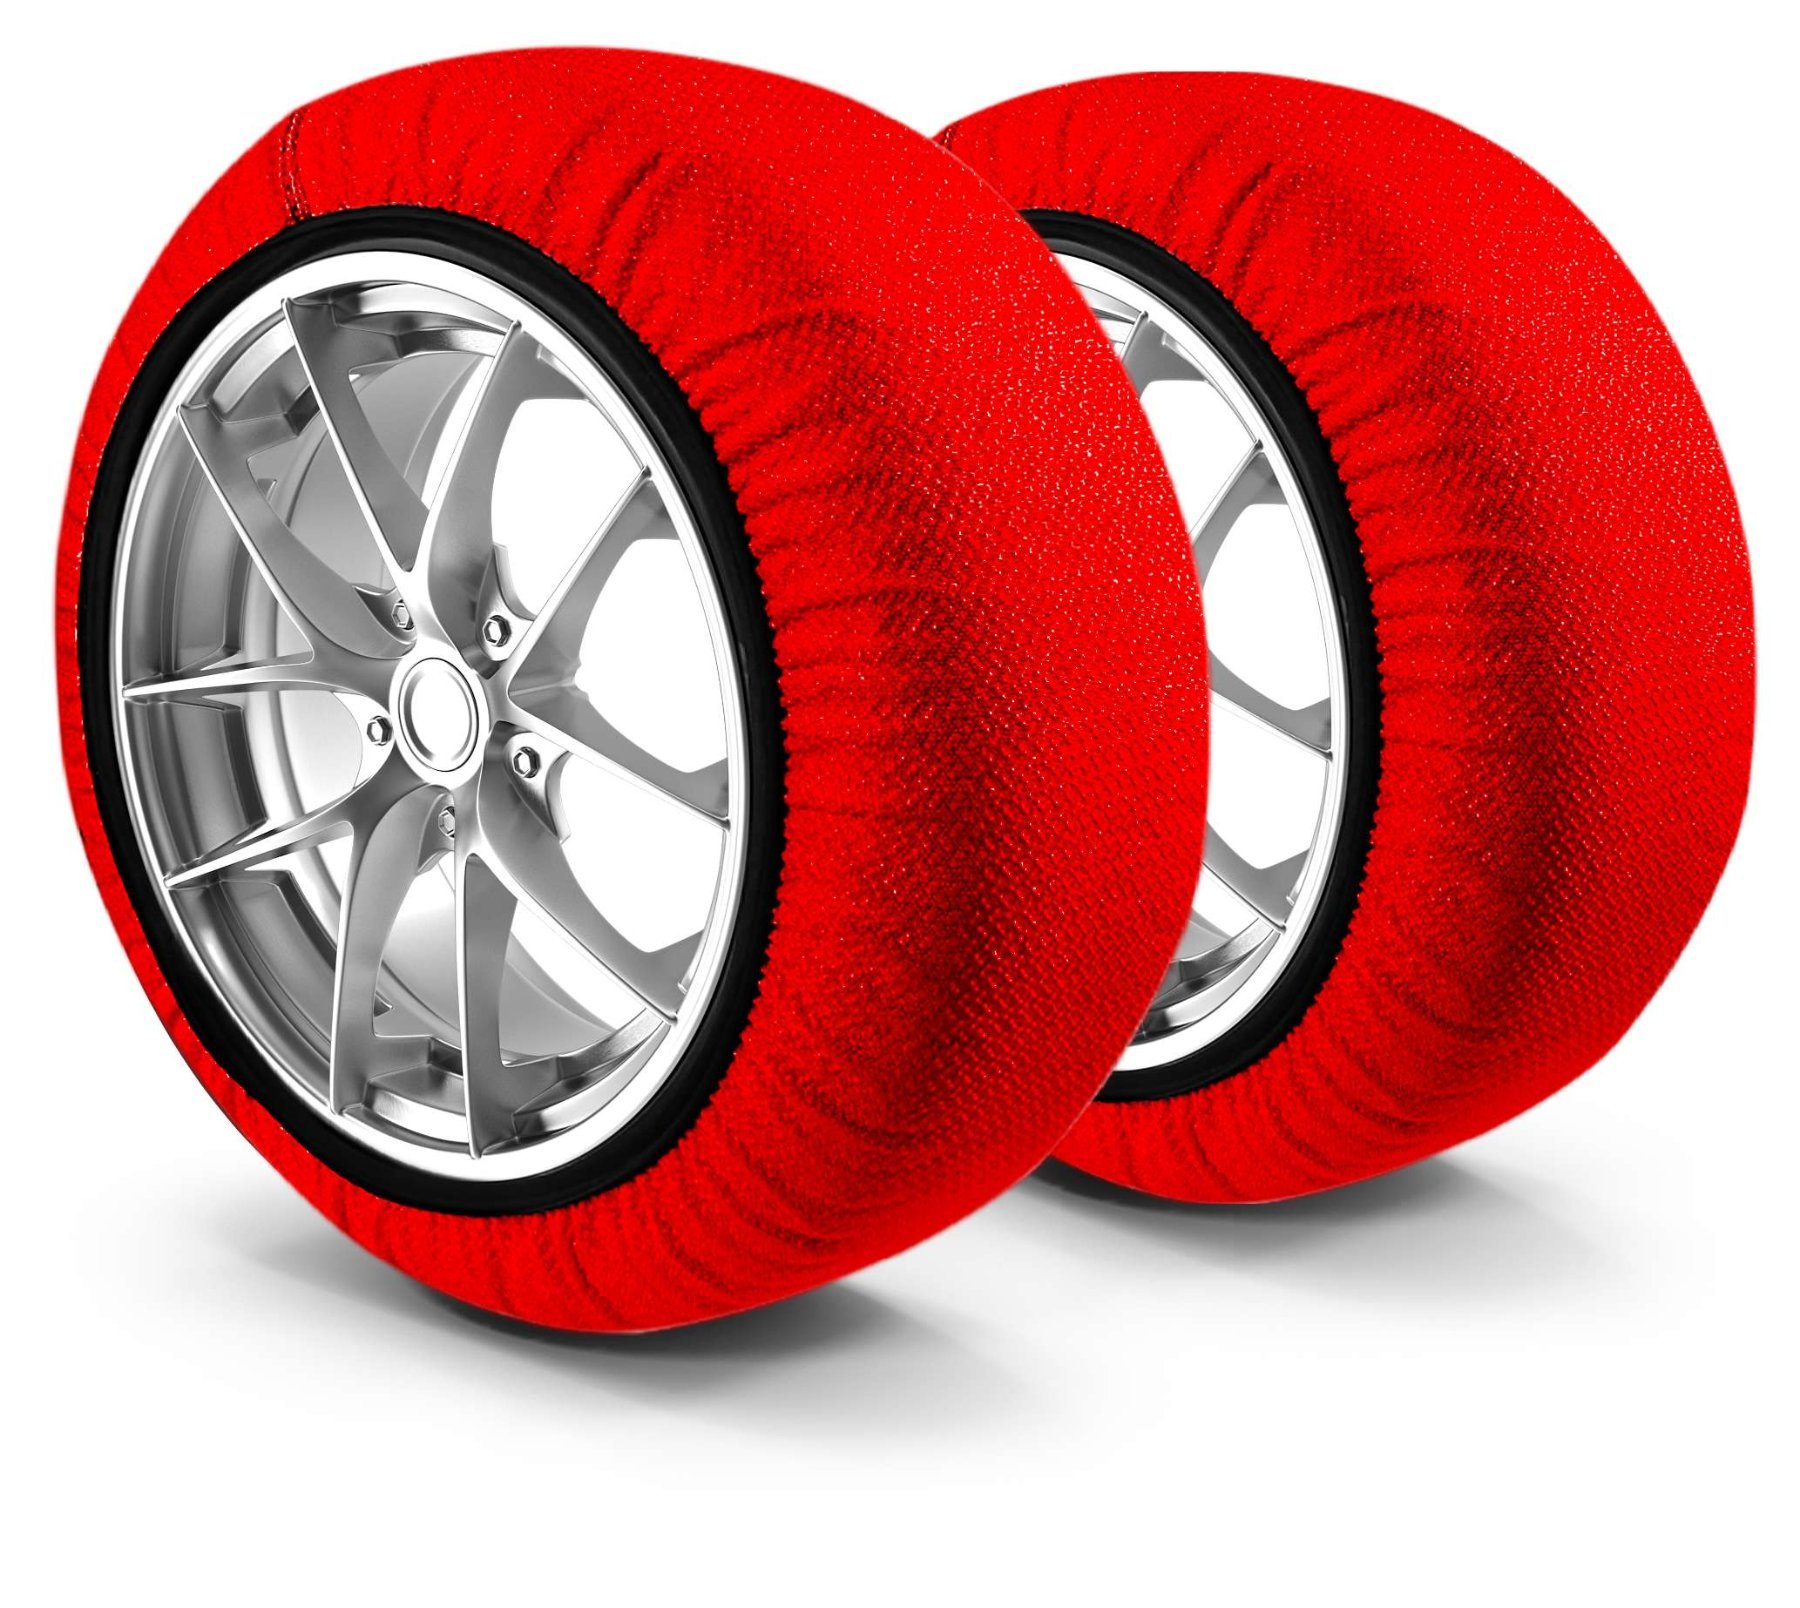 Basic Snow Chains Alternative Active S, Textile Snow Chains, Snow Socks Set of 2 red